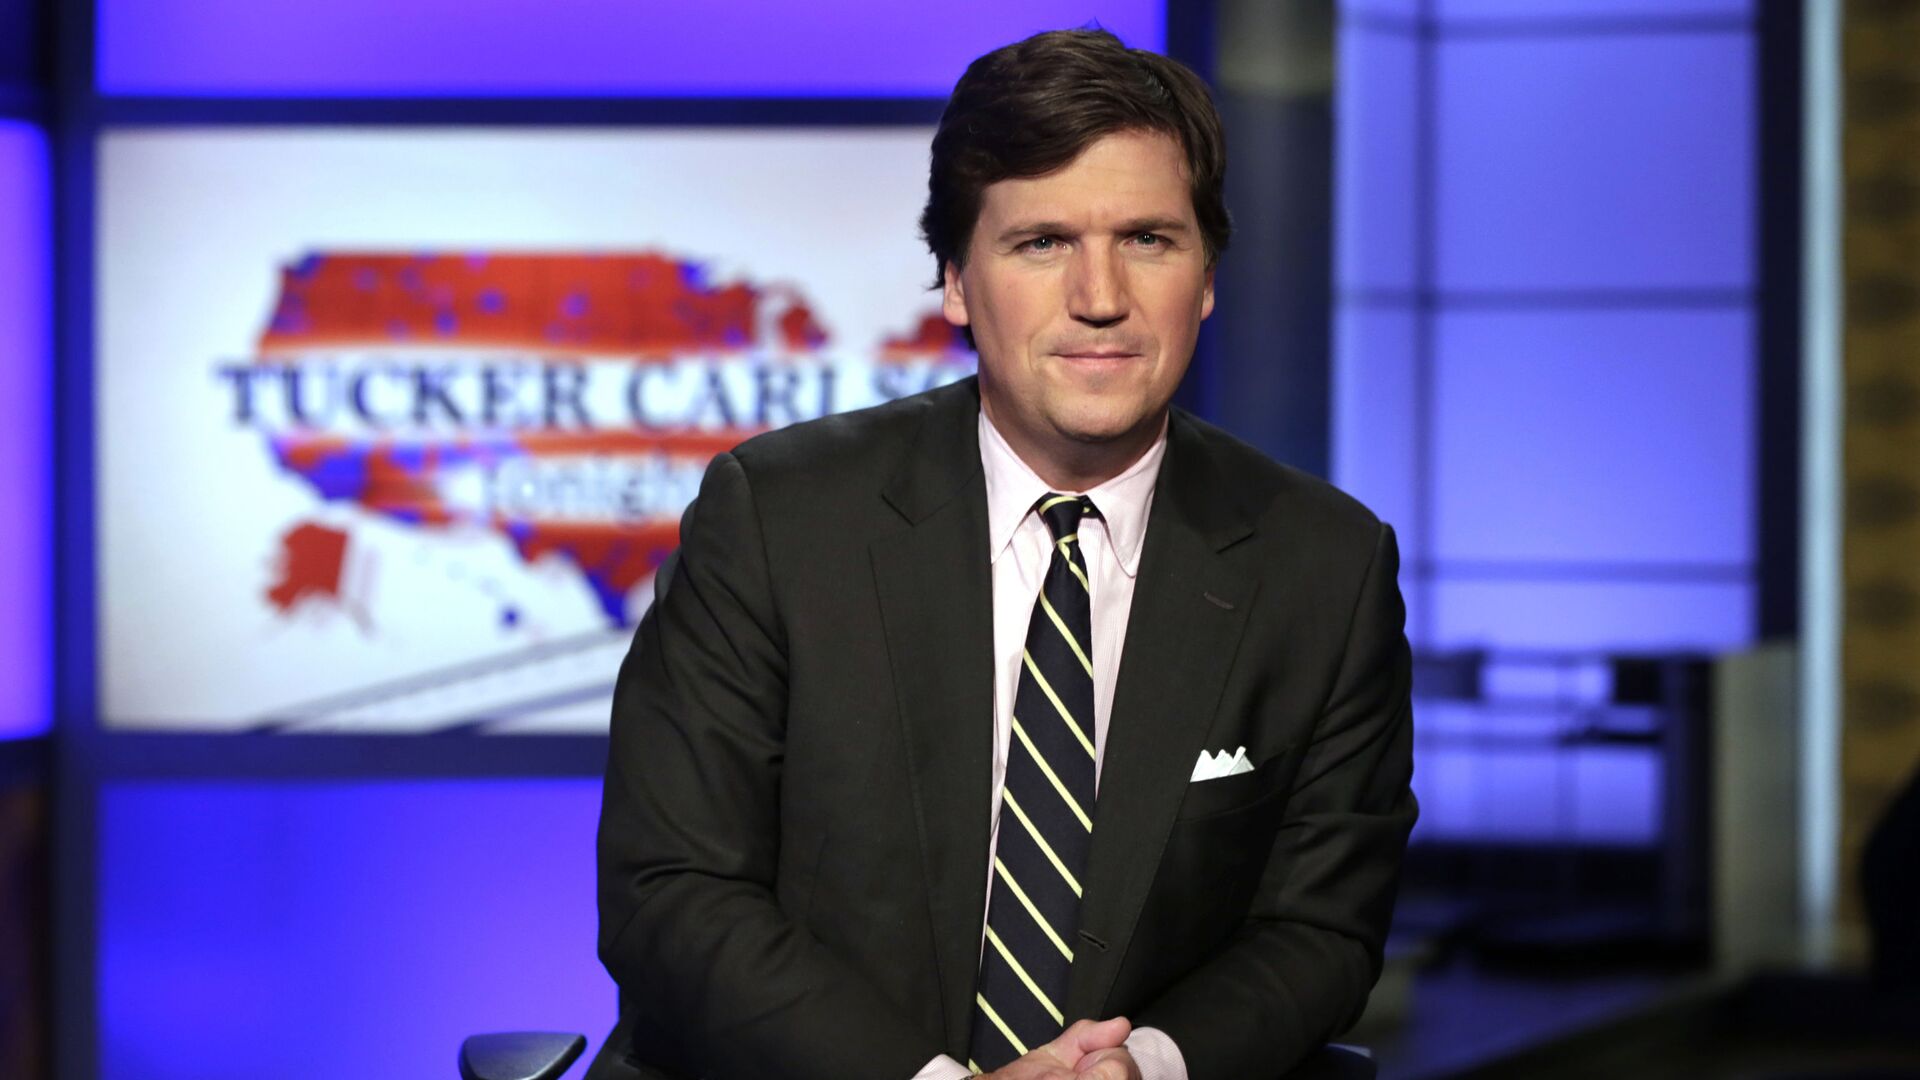 FILE - In this March 2, 2017 file photo, Tucker Carlson, host of Tucker Carlson Tonight, poses for photos in a Fox News Channel studio, in New York. Carlson, who on Monday's show addressed the story of his former top writer, Blake Neff, who resigned after CNN found he had written a series of controversial tweets under a pseudonym, has left for vacation. It fits a pattern at Fox, whose personalities tend to go away to cool off when the heat is on. Carlson's vacation is the sixth example in a little more than three years. A Fox representative confirmed Carlson's vacation was planned before the Neff story broke. (AP Photo/Richard Drew, File) - Sputnik International, 1920, 11.03.2021